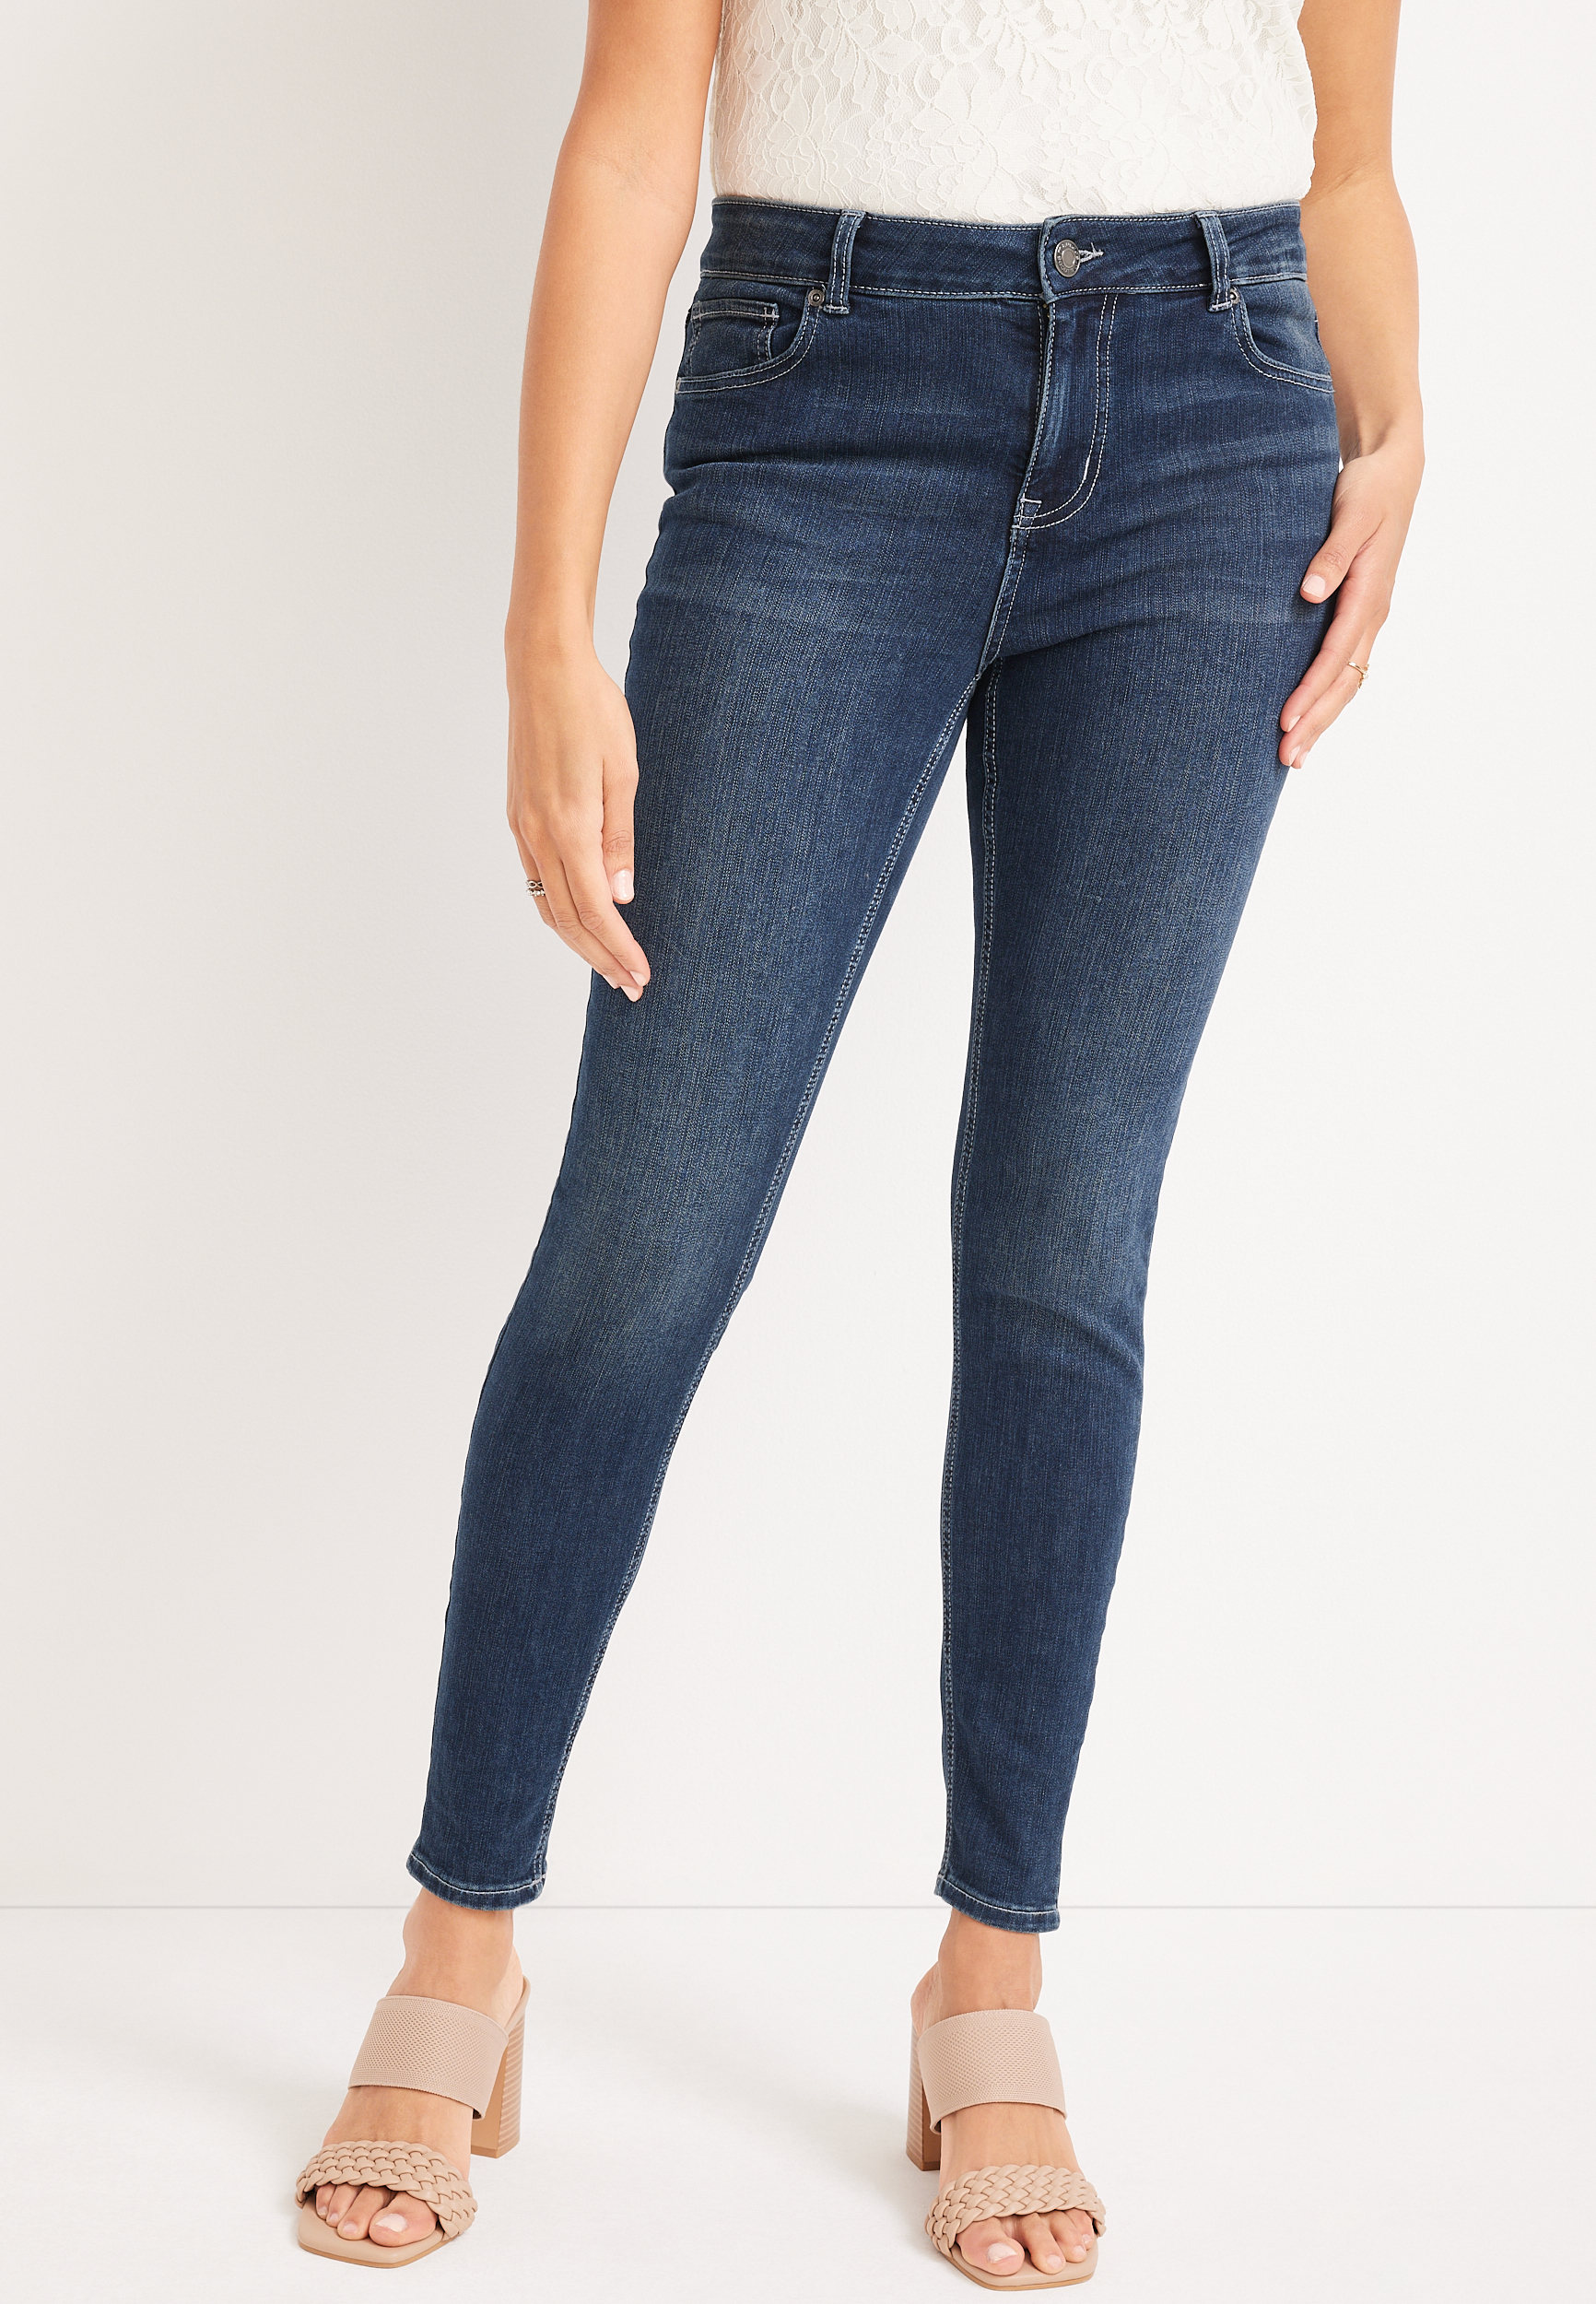 m jeans by maurices™ Classic Slim Boot Mid Fit Mid Rise Jean